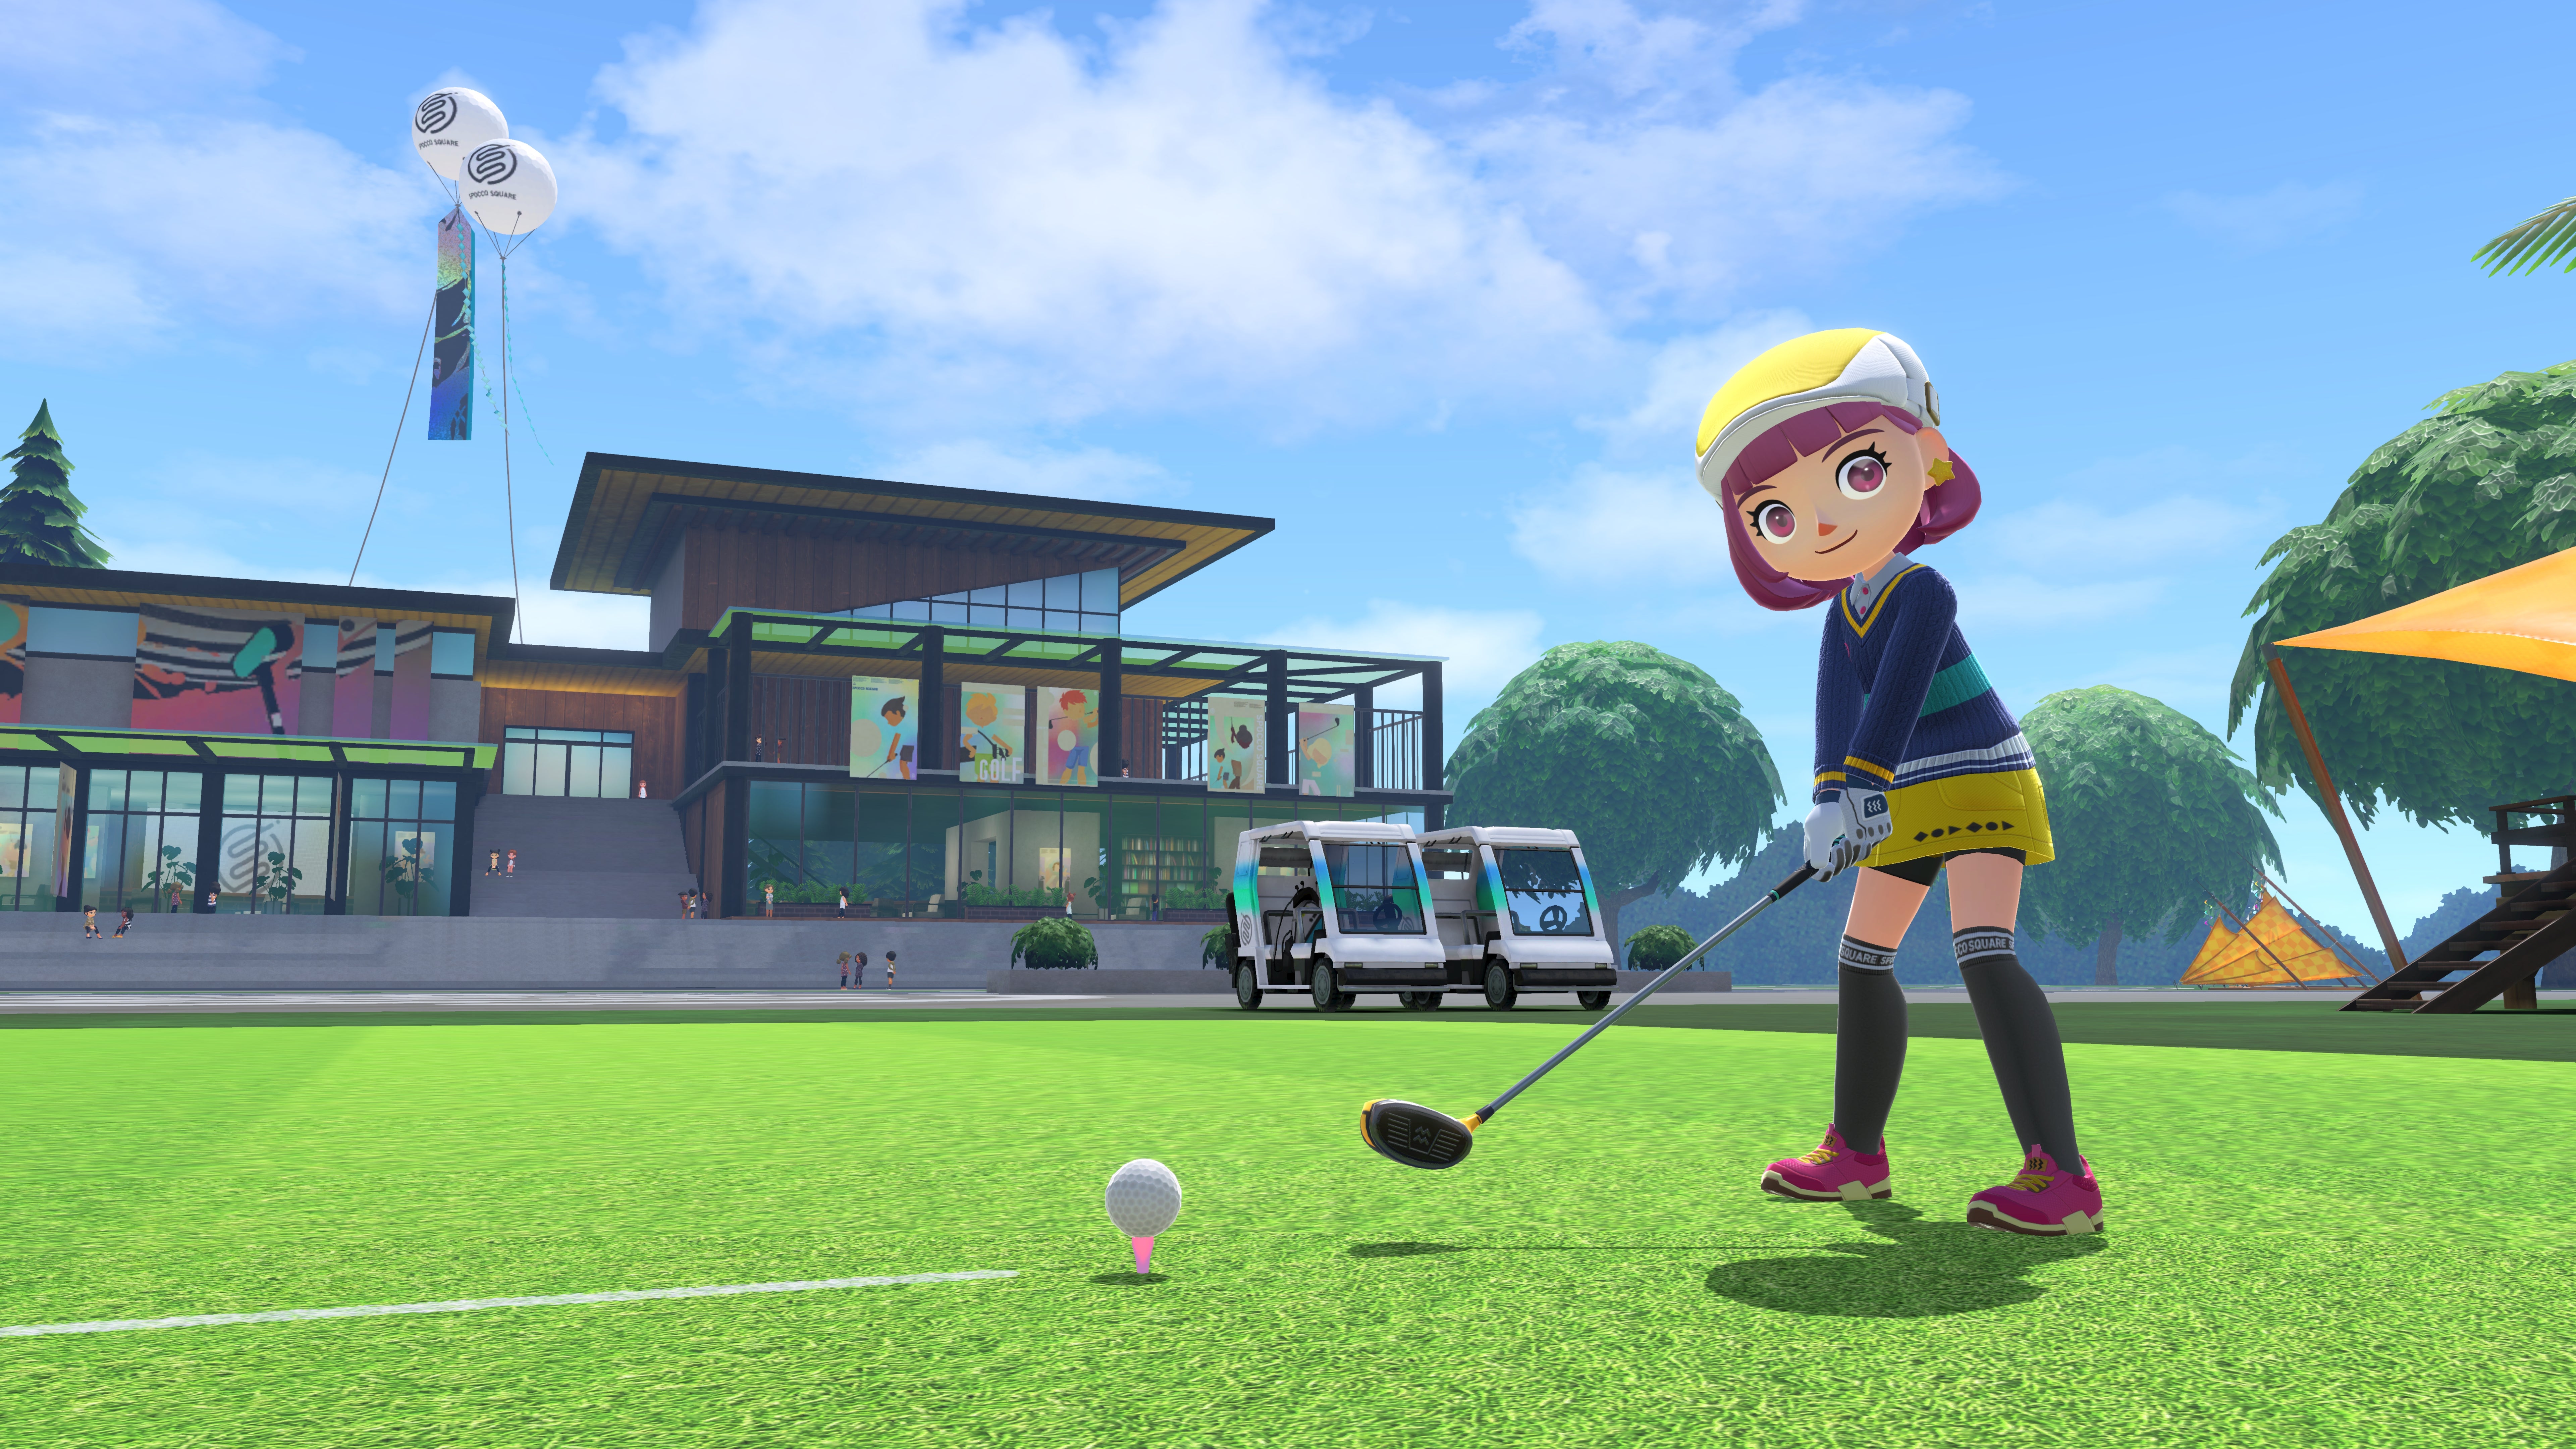 Image for Nintendo Switch Sports update adds Golf to the game